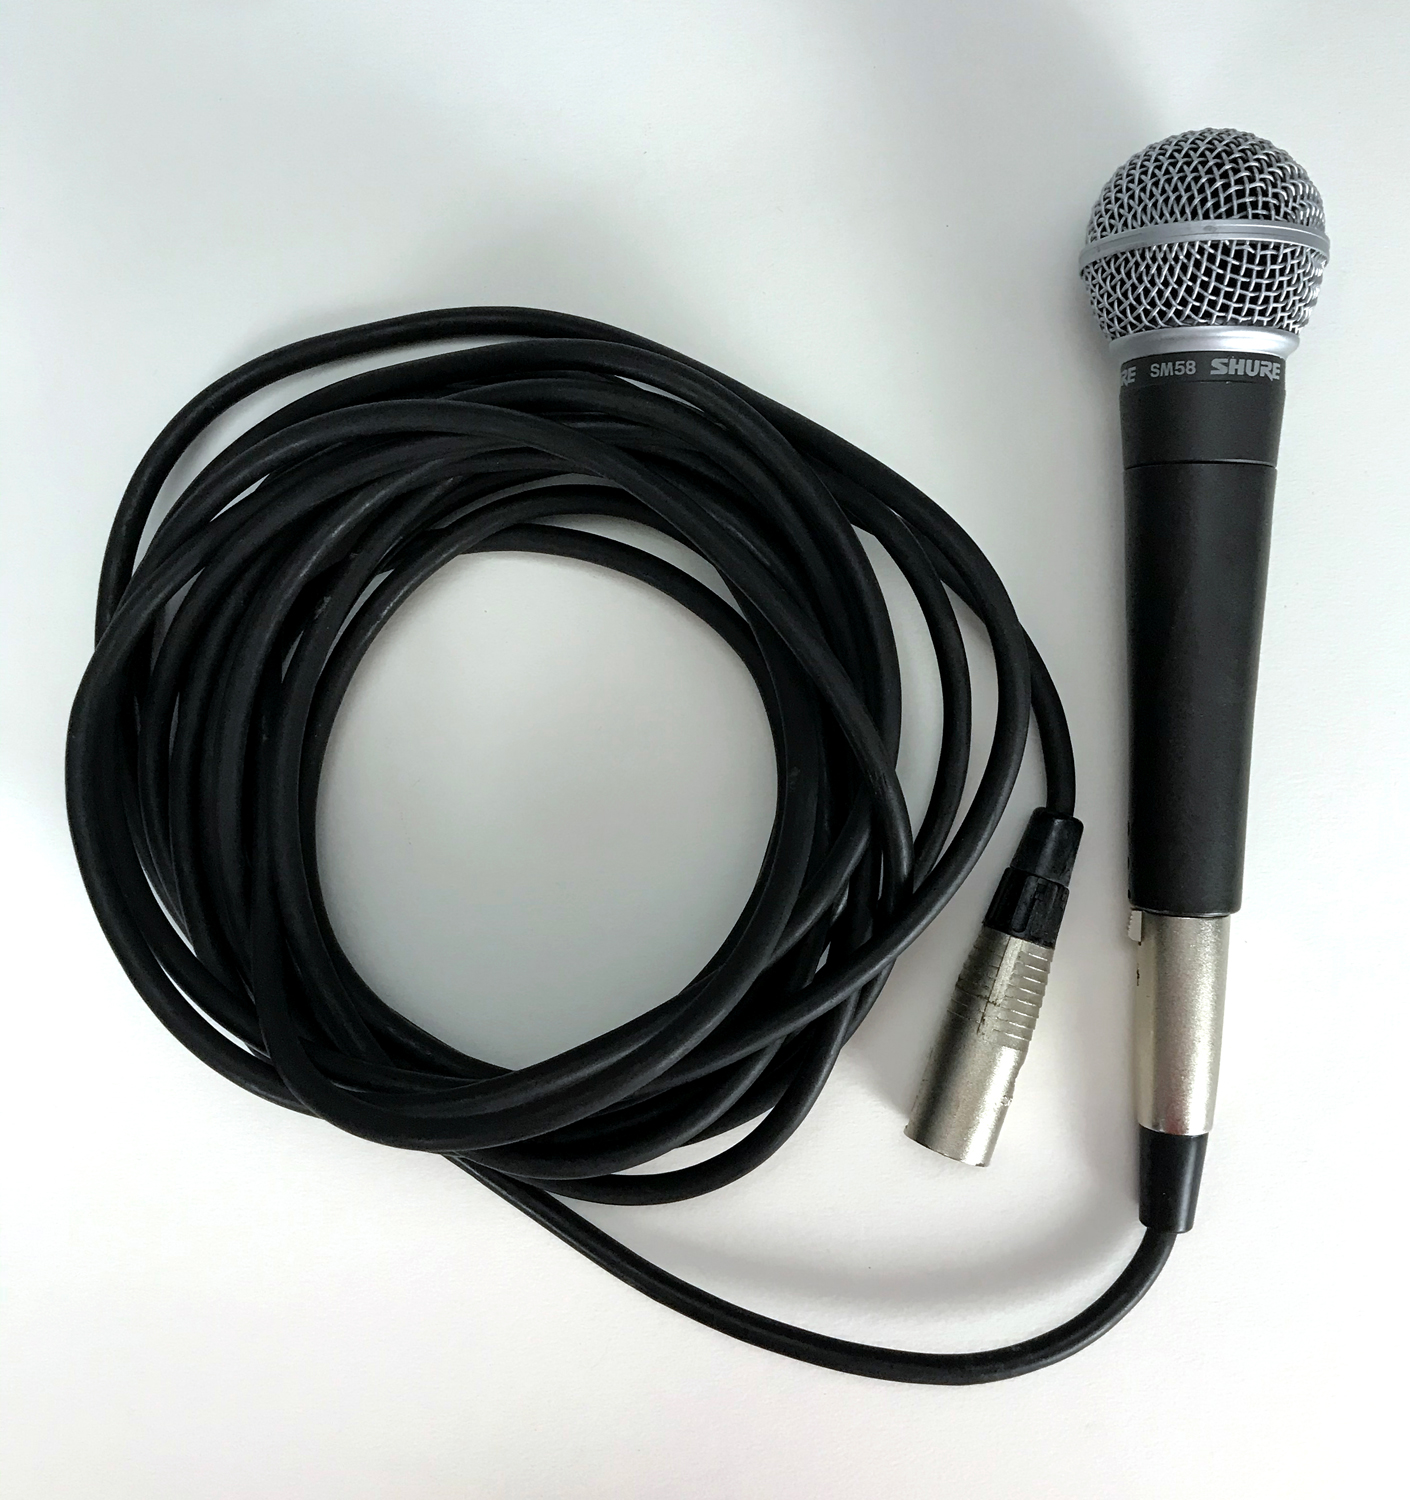 Detail - Elvis Presley Shure Model "SM58" Microphone and Cord Used in the Film <em>Elvis: That's the Way It Is</em> – Acquired from A Sound Technician That Worked on the Film!